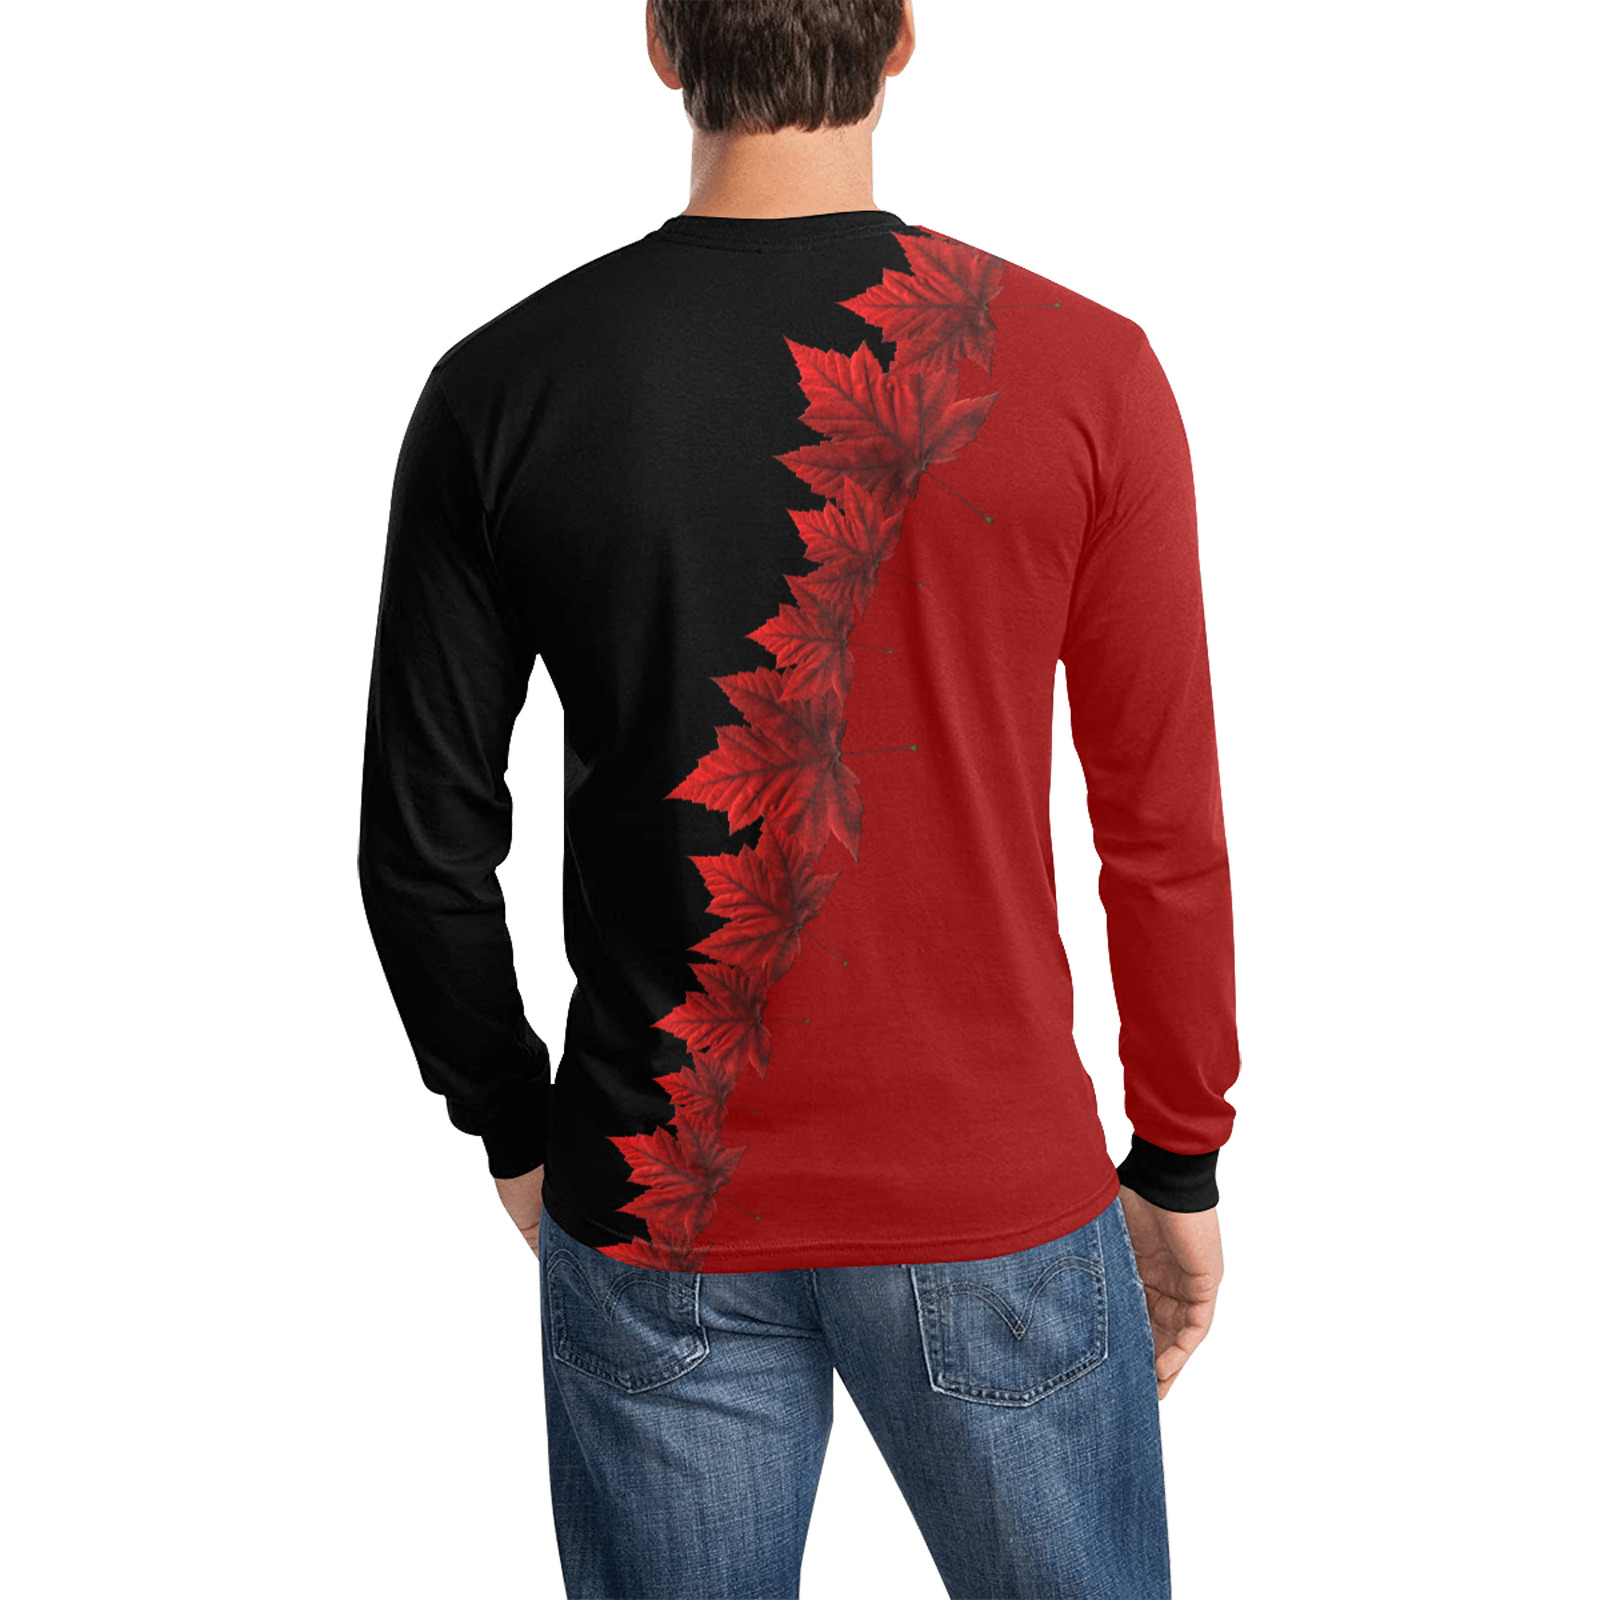 Canada Maple Leaf Men's All Over Print Long Sleeve T-shirt (Model T51)